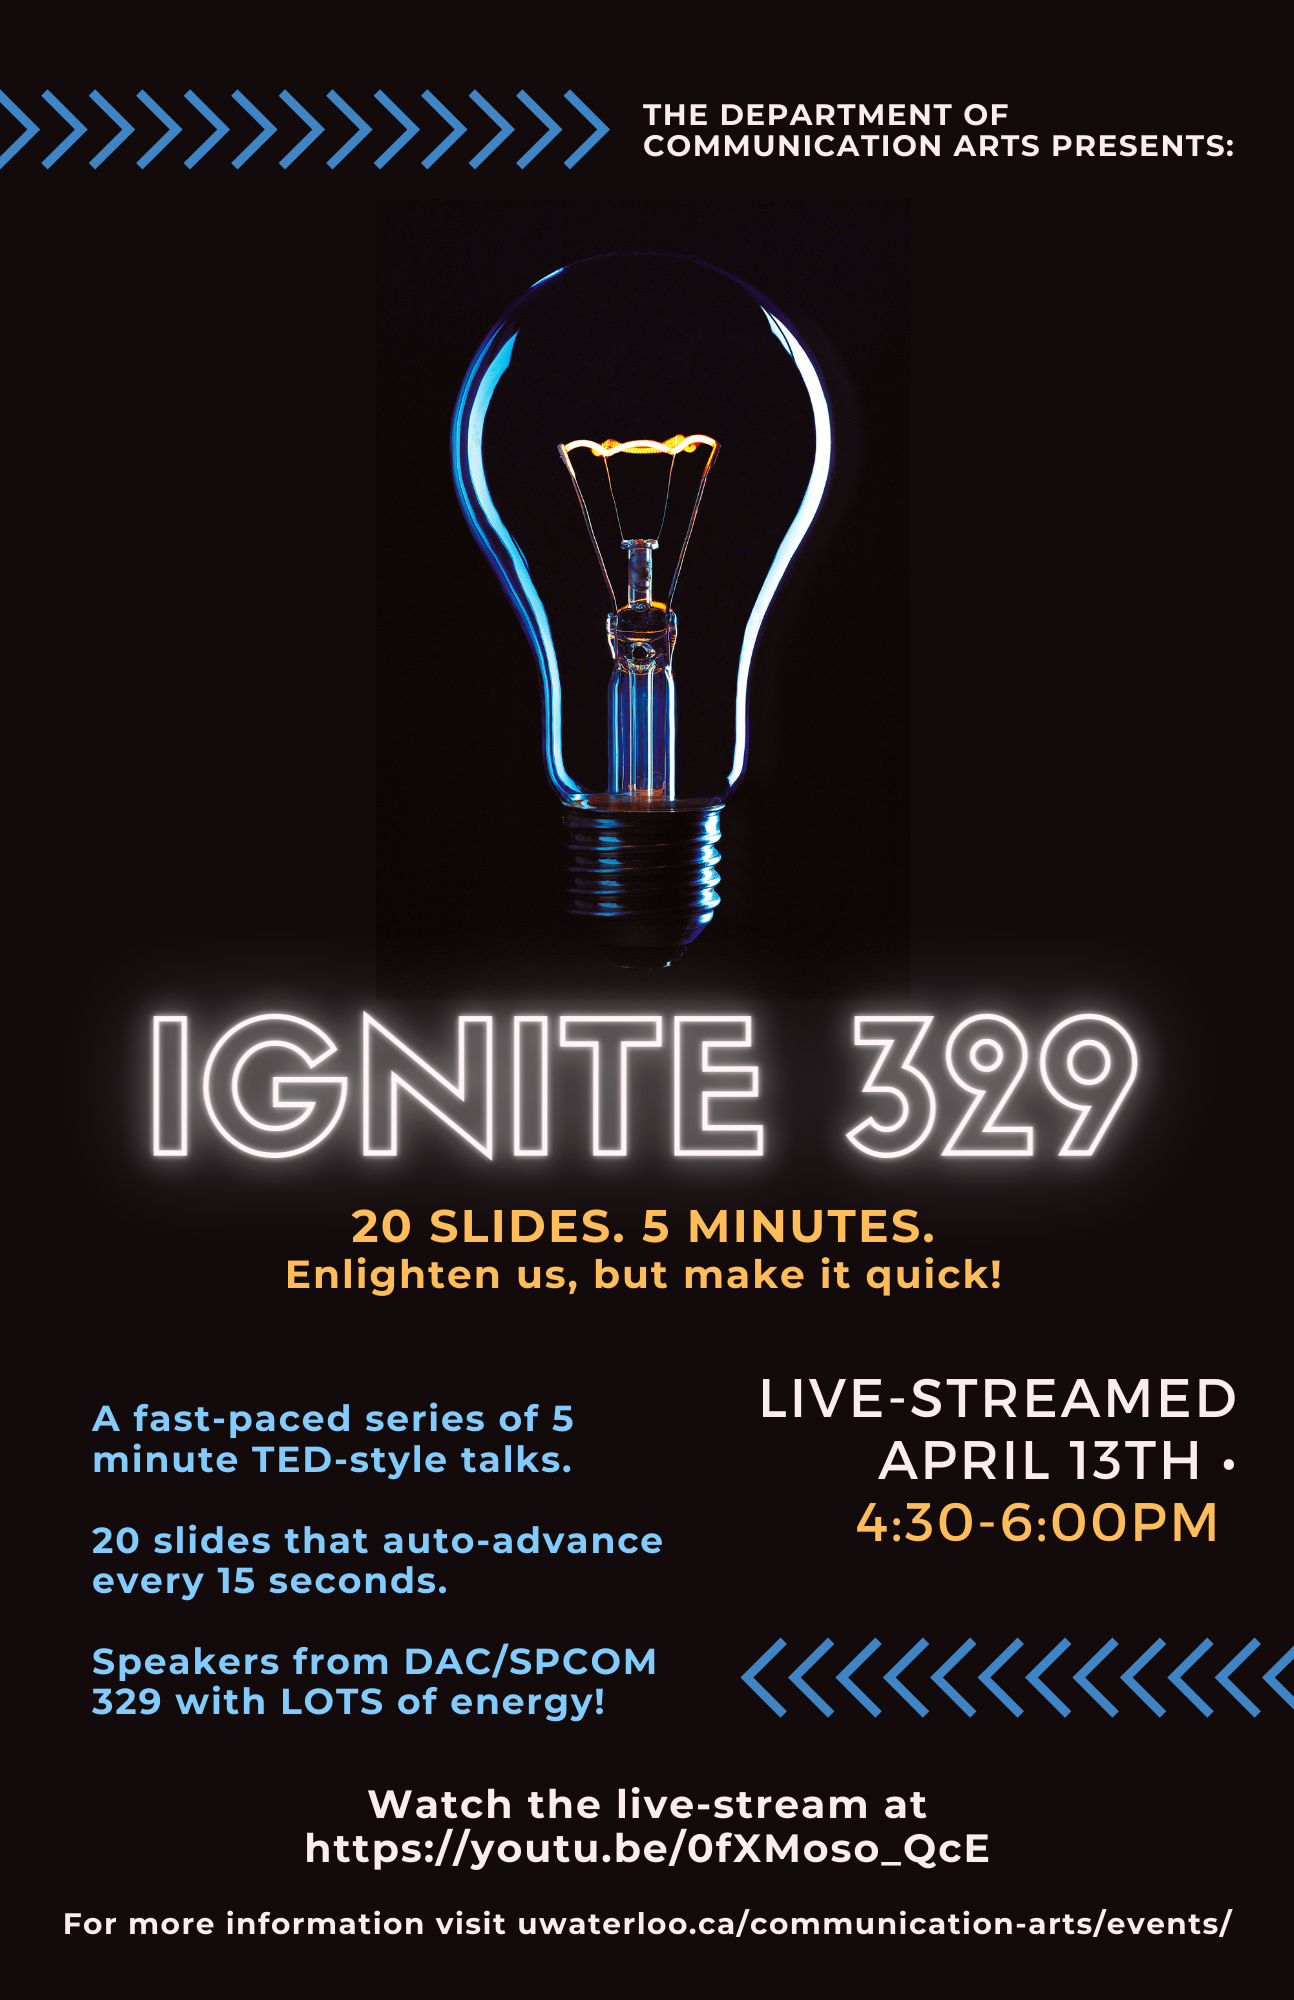 Digital flyer for Ignite 329. Image description: a clear light bulb with a blue rim light and a glowing yellow filament is pictured against a black background. The title 'Ignite 329' is in glowing, white neon font. All poster text and event details are available in the written description of this event.